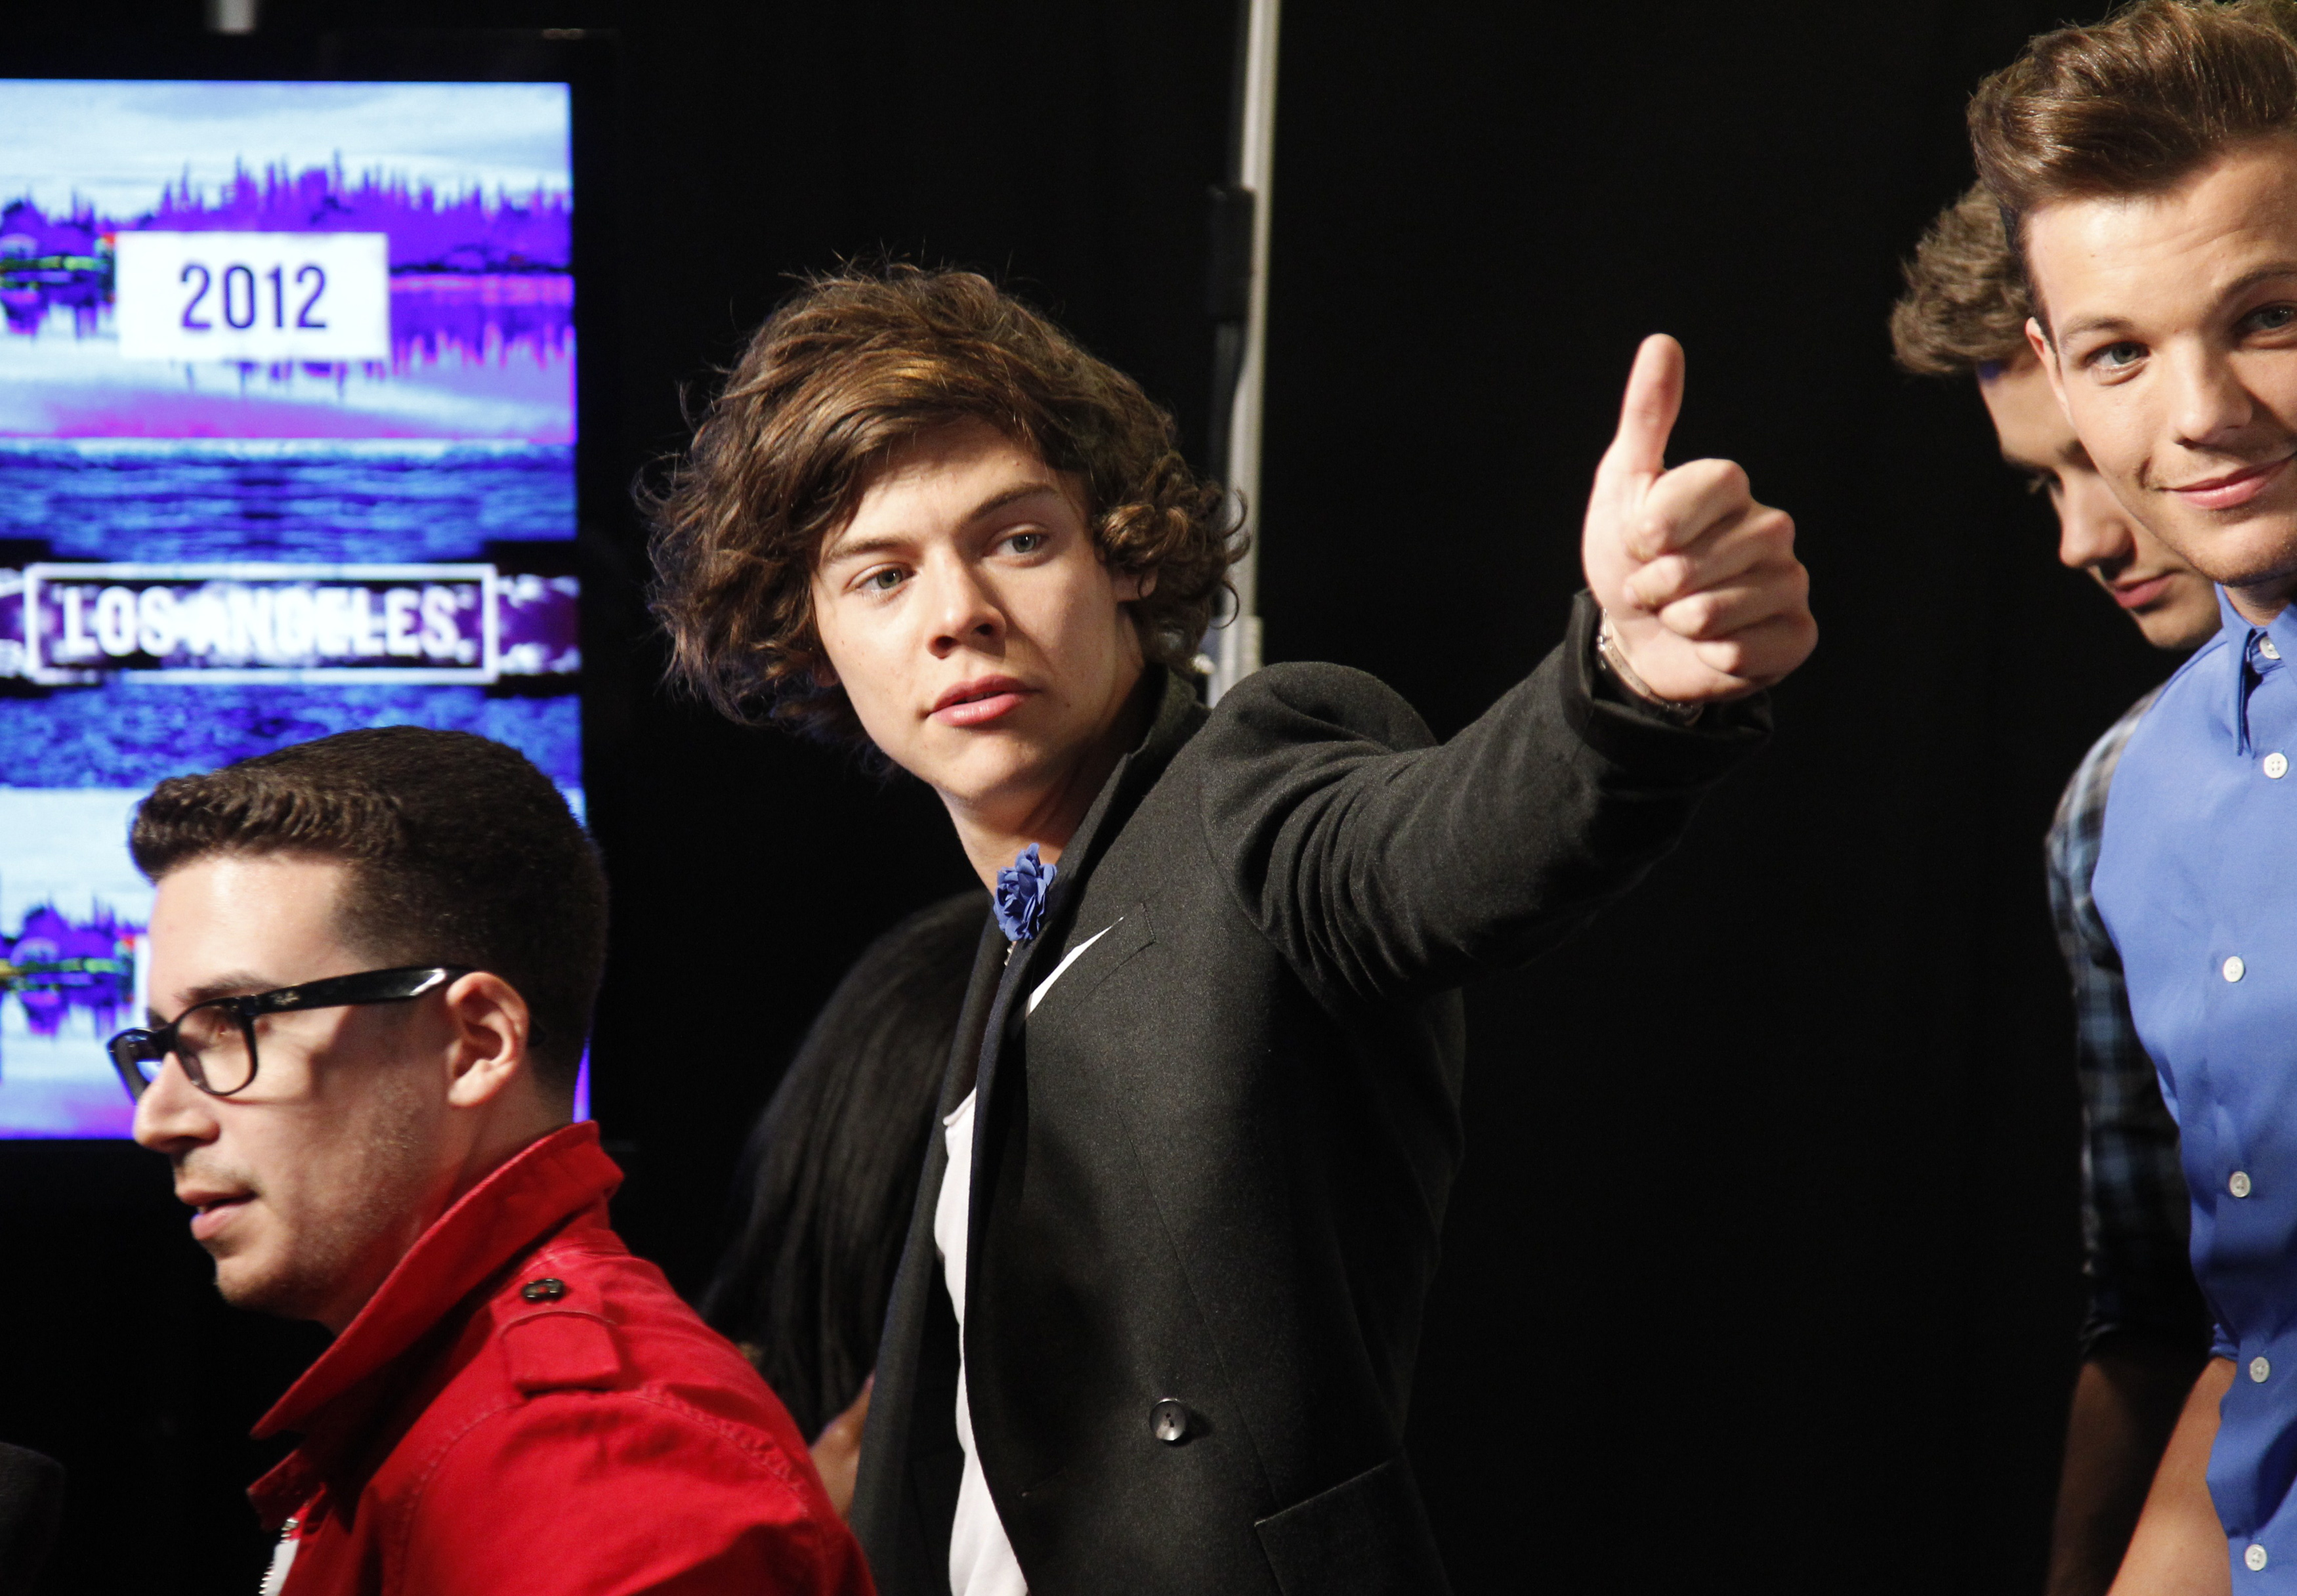 Harry Styles, of the boy band One Direction, gestures as the band poses backstage after winning awards for "Best Pop Video and "Most Share-Worthy Video" during the 2012 MTV Video Music Awards in Los Angeles, September 6, 2012.  REUTERS/Danny Moloshok    (UNITED STATES  - Tags: ENTERTAINMENT)    (MTV-BACKSTAGE)